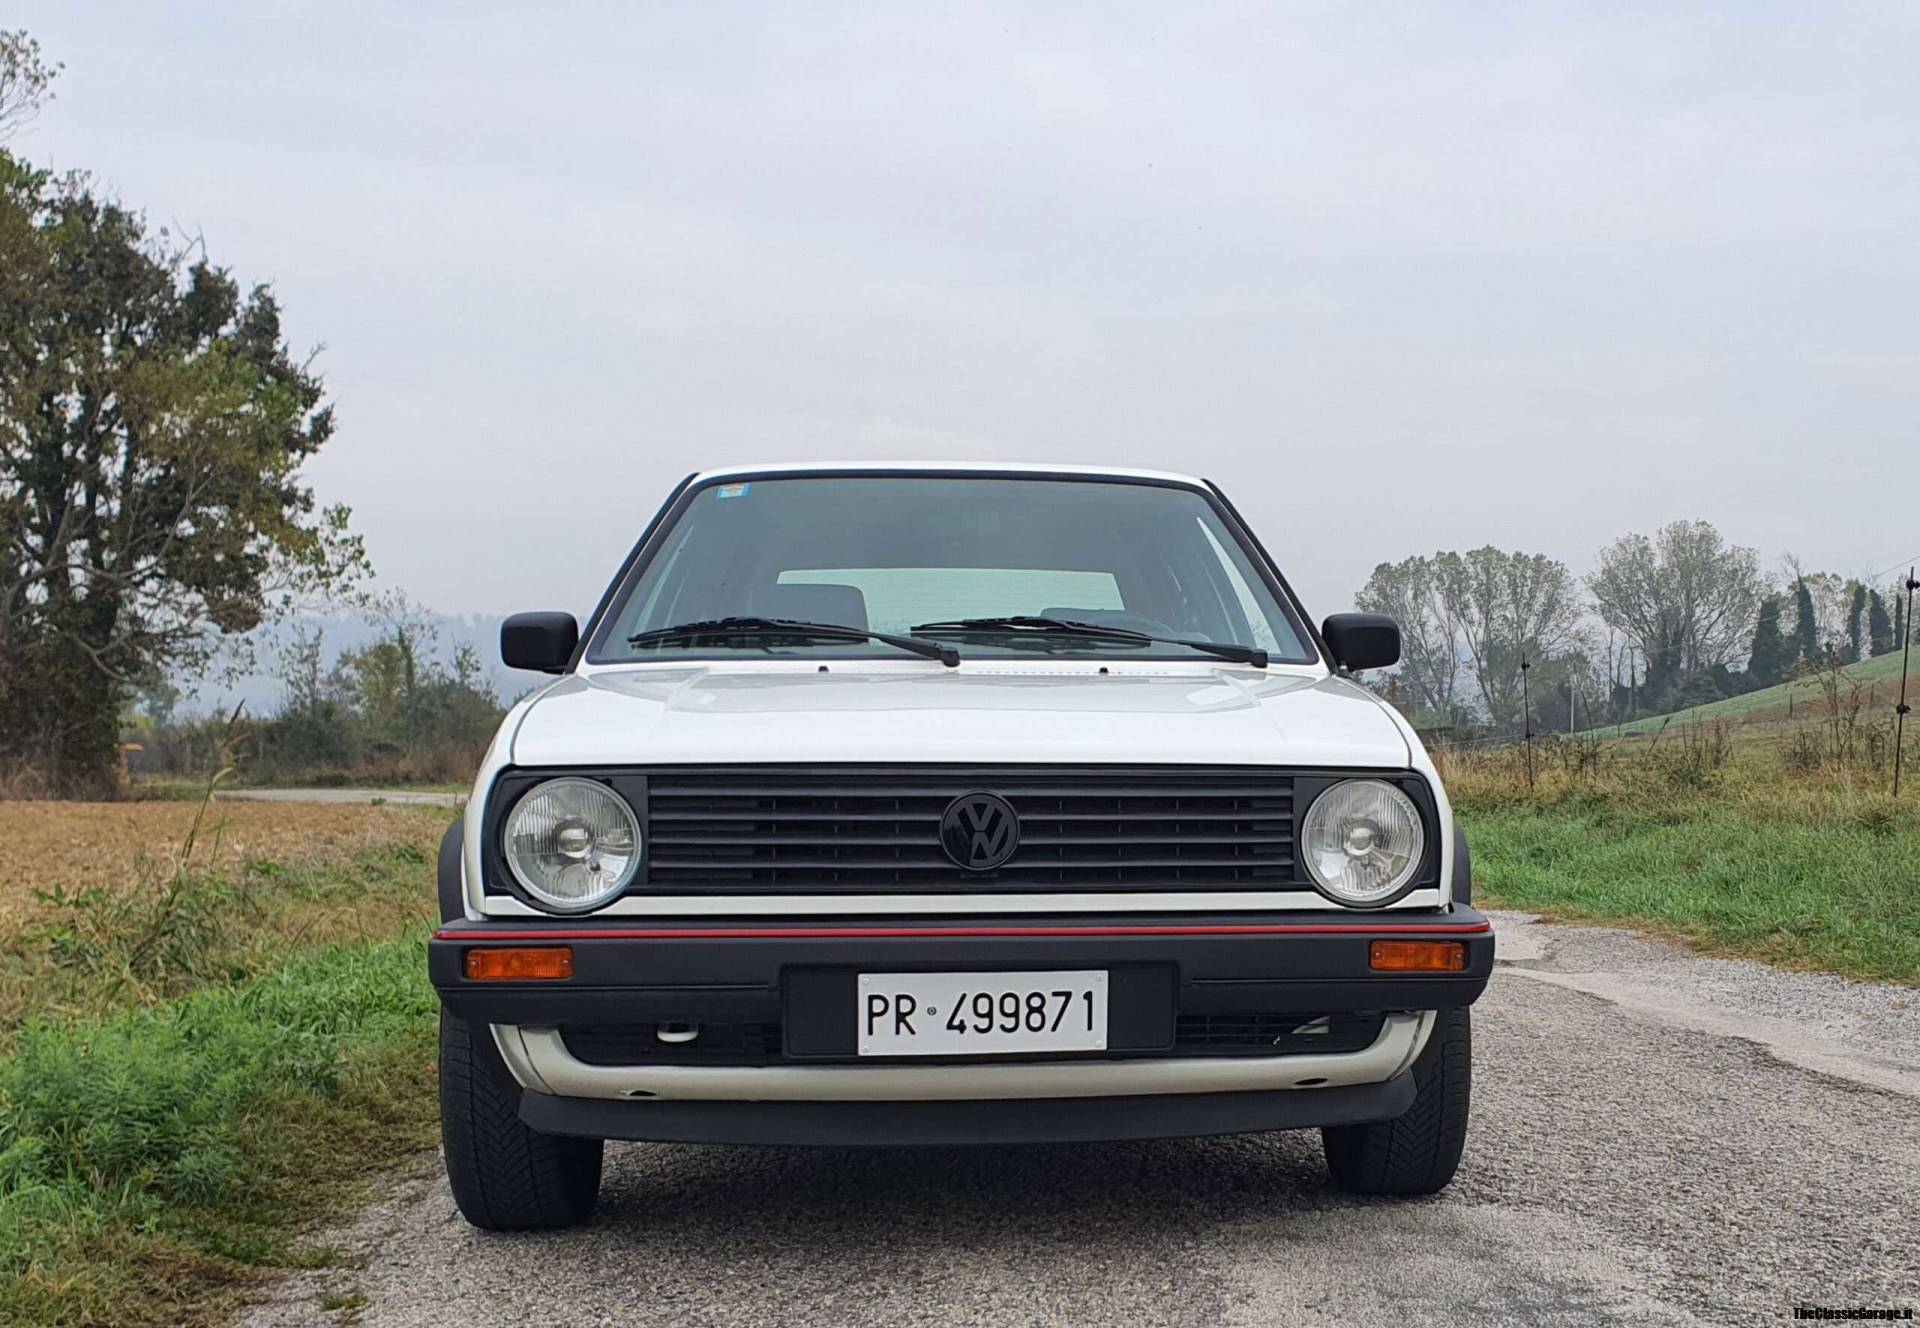 For Sale: Volkswagen Golf Mk II Syncro 1.8 (1987) offered for €9,700